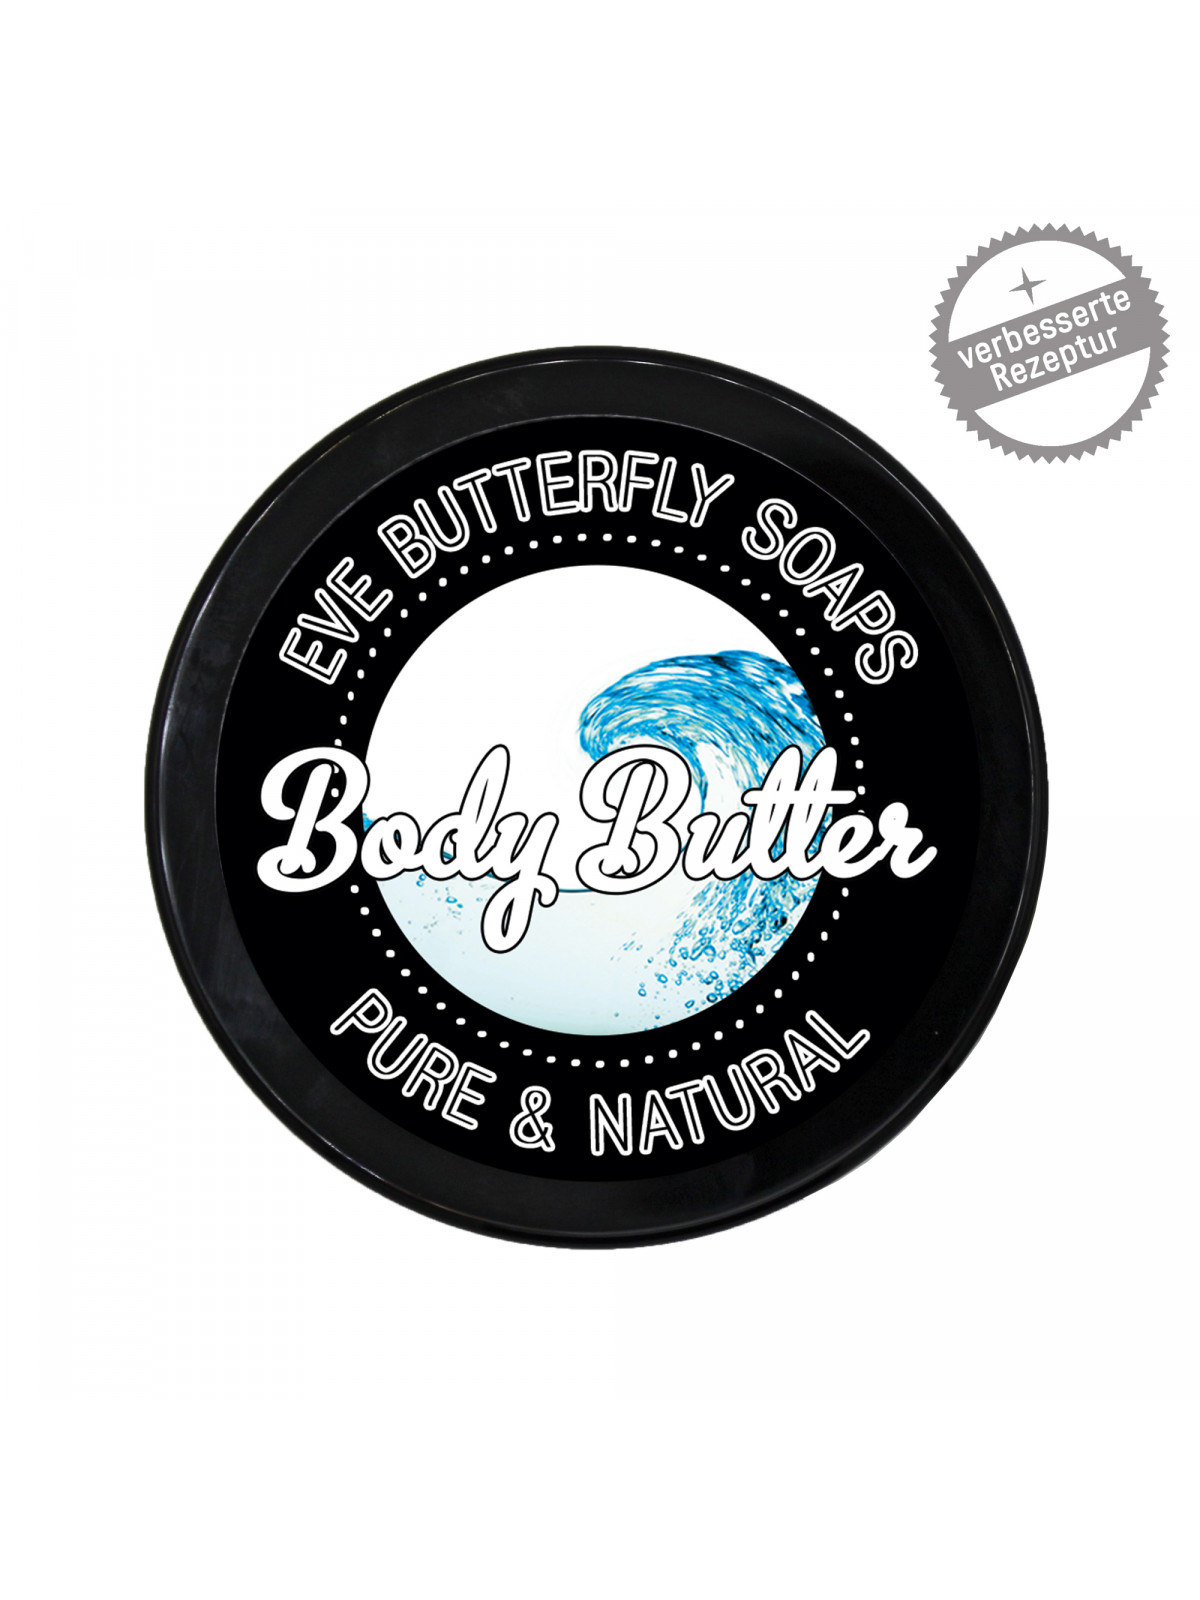 Shea Body Butter ohne Duftstoffe - pur und naturell